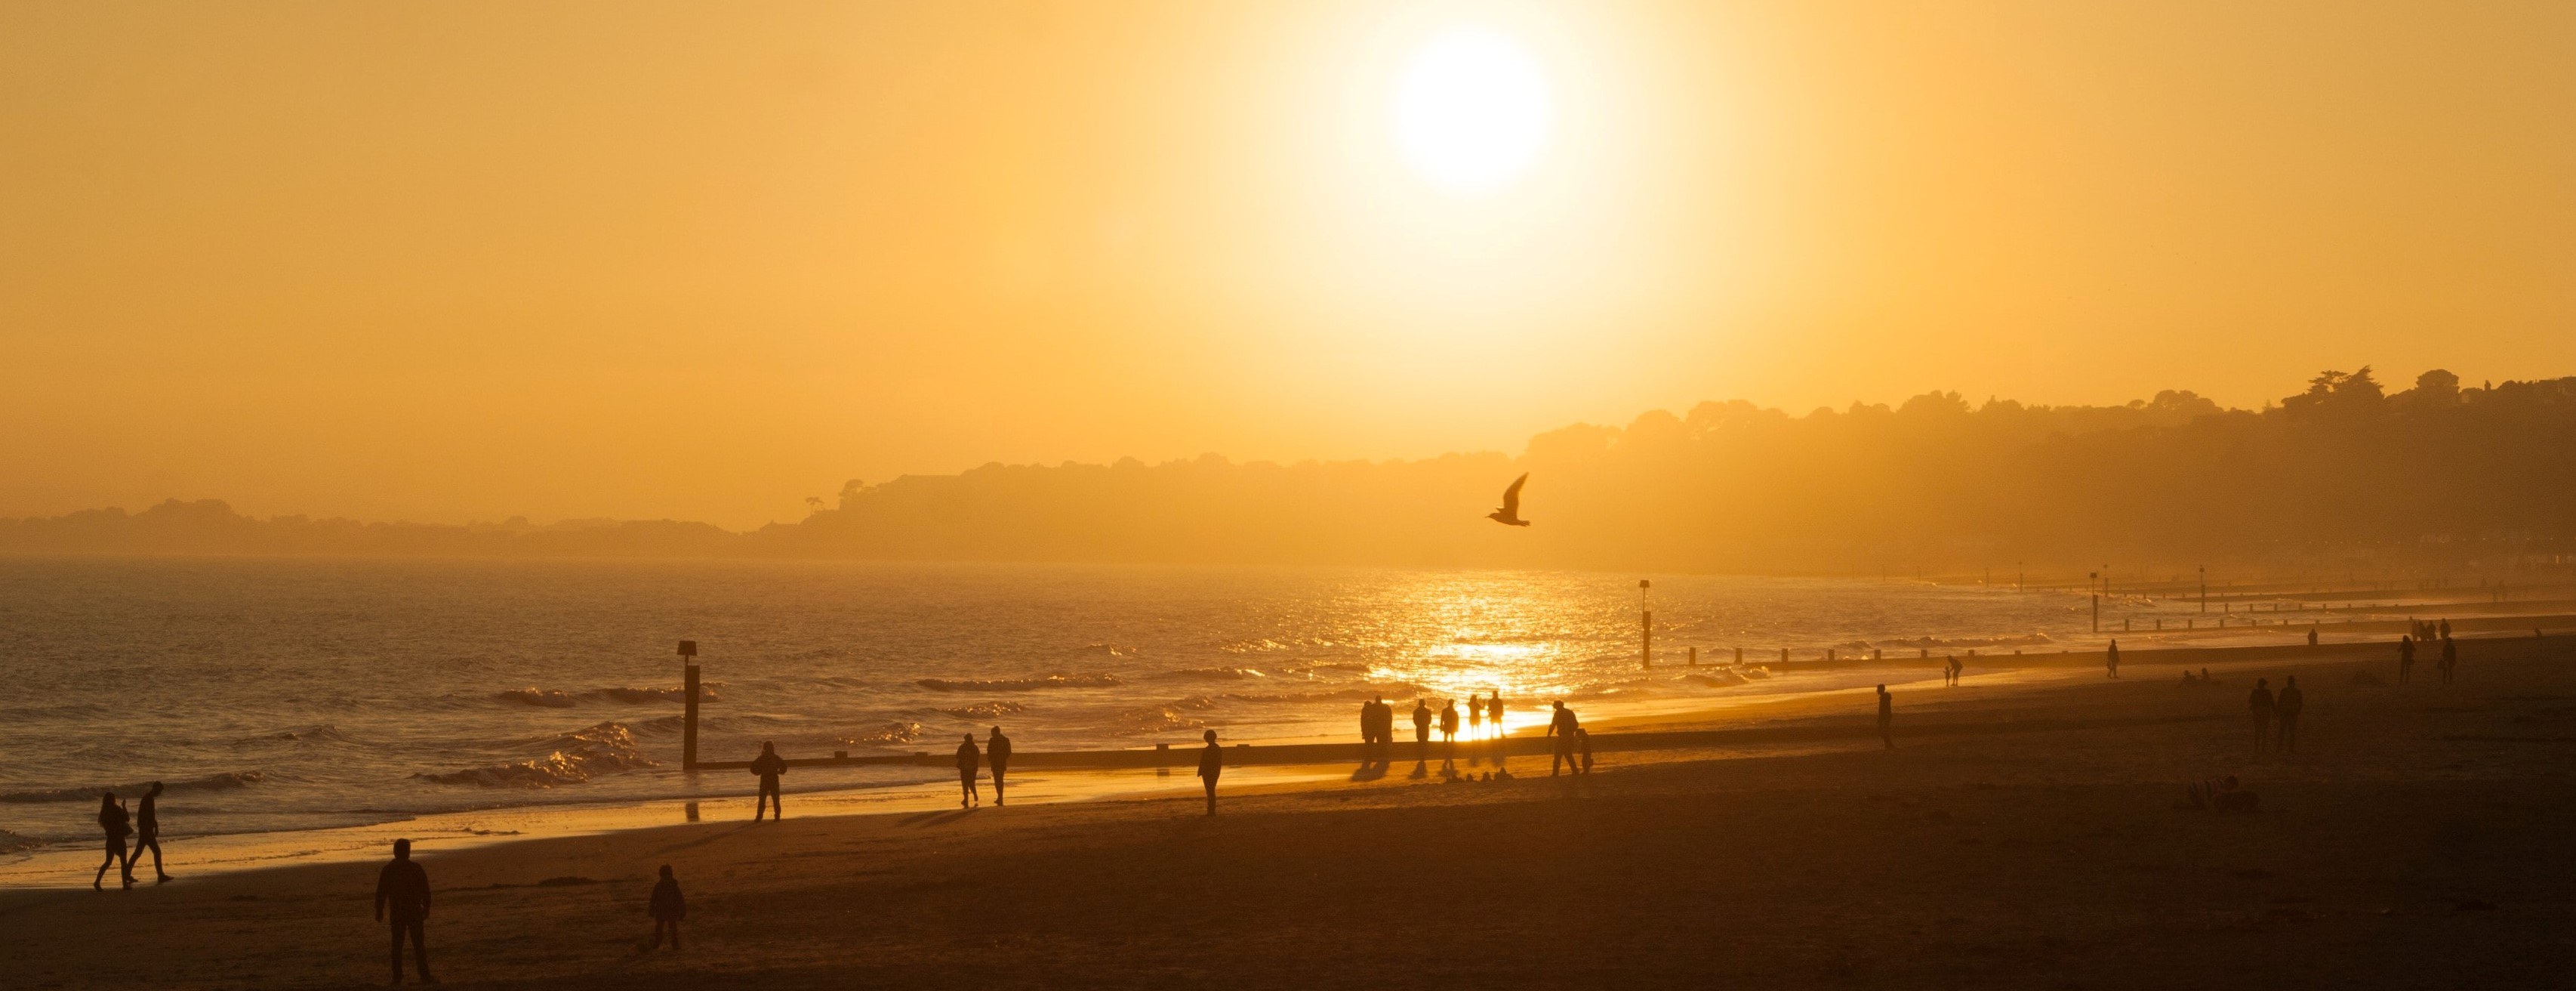 Why Bournemouth is the best place to spend digital marketing budget Image One image